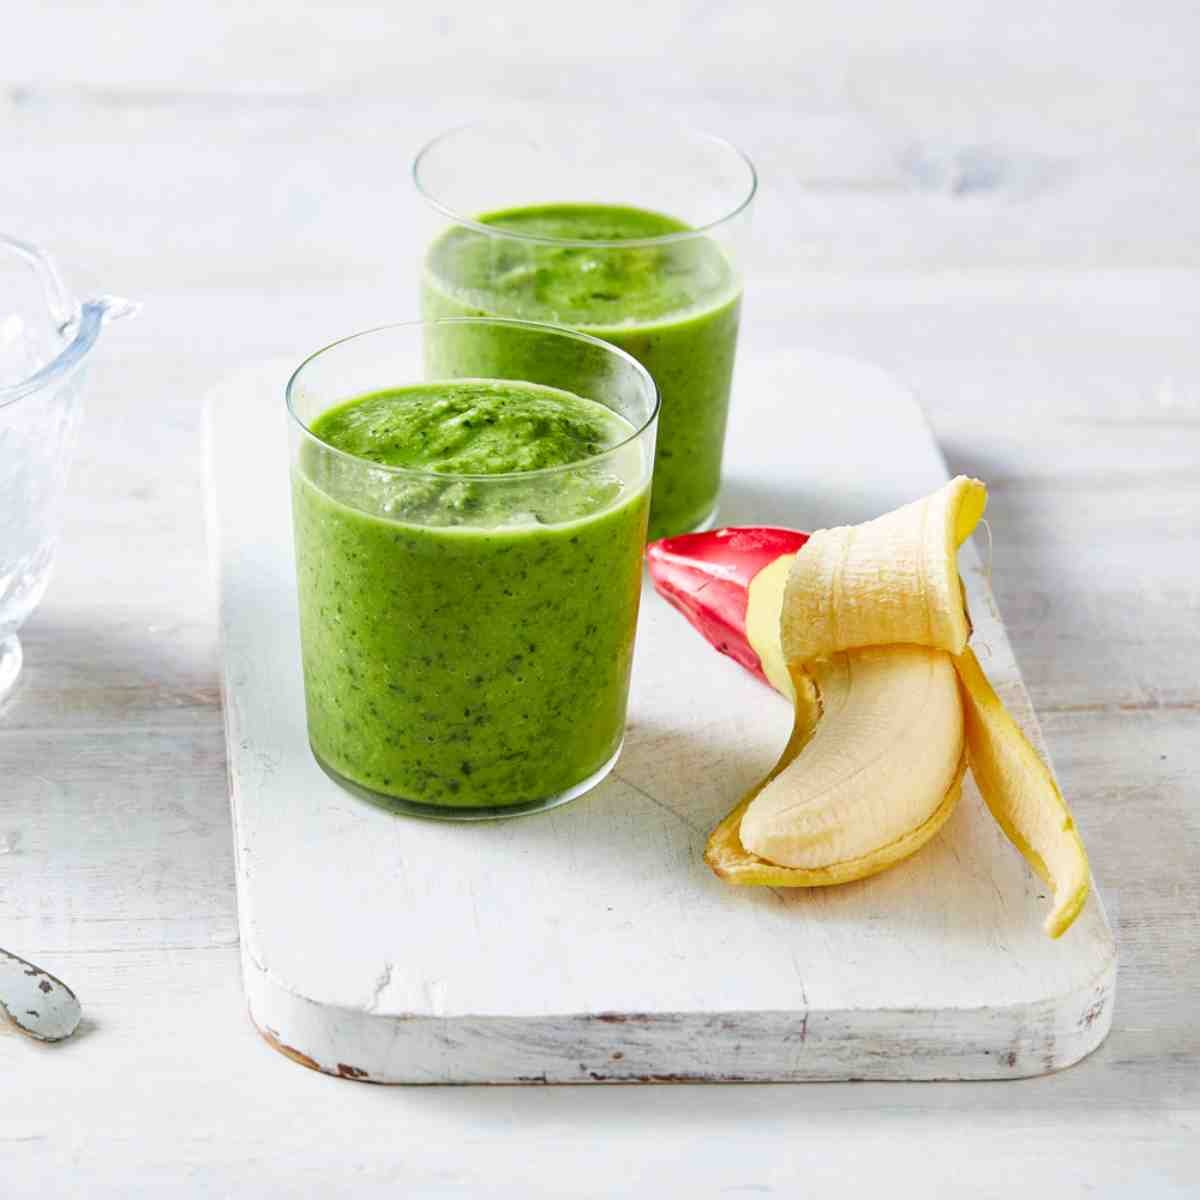 Two glasses of green banana smoothie placed on a chopping board.